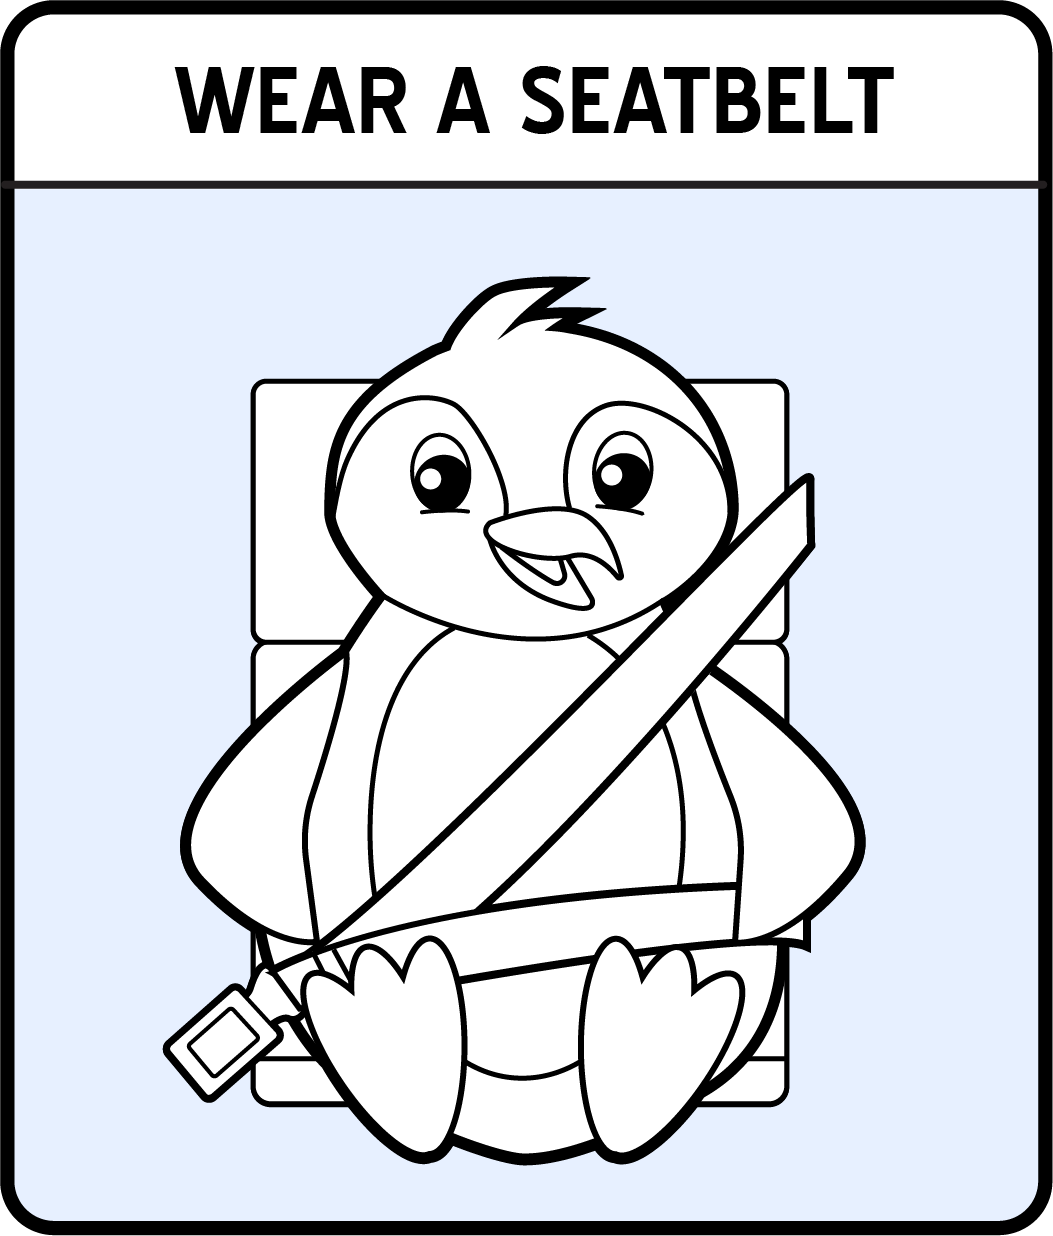 A cartoon penguin with his seatbelt buckled.